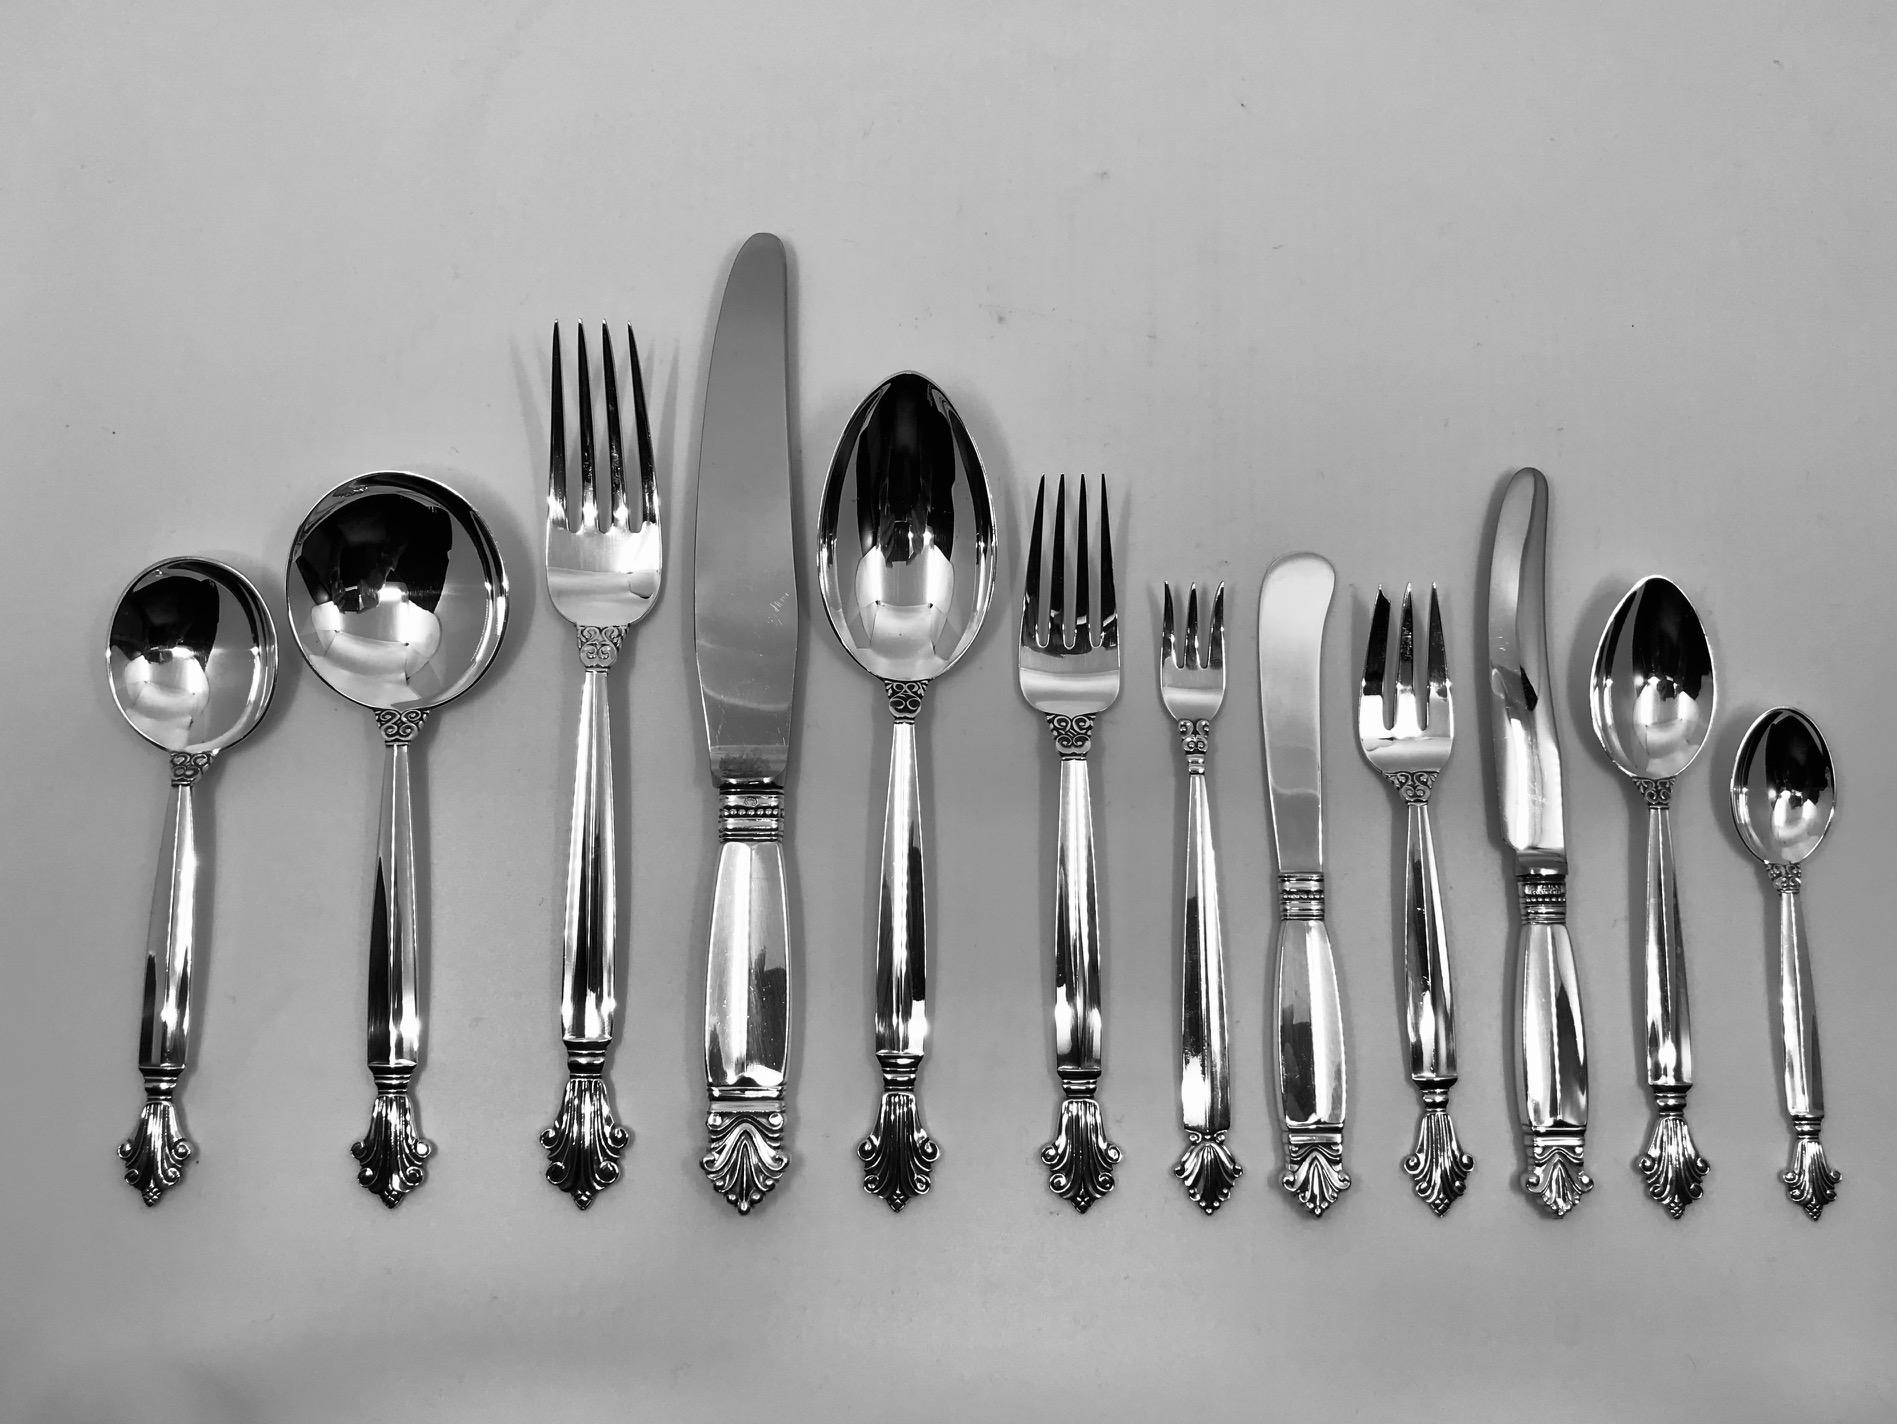 159 pieces of Georg Jensen sterling silverware in the Acanthus pattern, design by Johan Rohde from 1917.
This set includes –
12 dinner knives short handle 9? (22.9cm)
12 dinner forks 7 7/8? (19.8cm)
12 dinner spoons 7½” (19cm)
12 luncheon forks